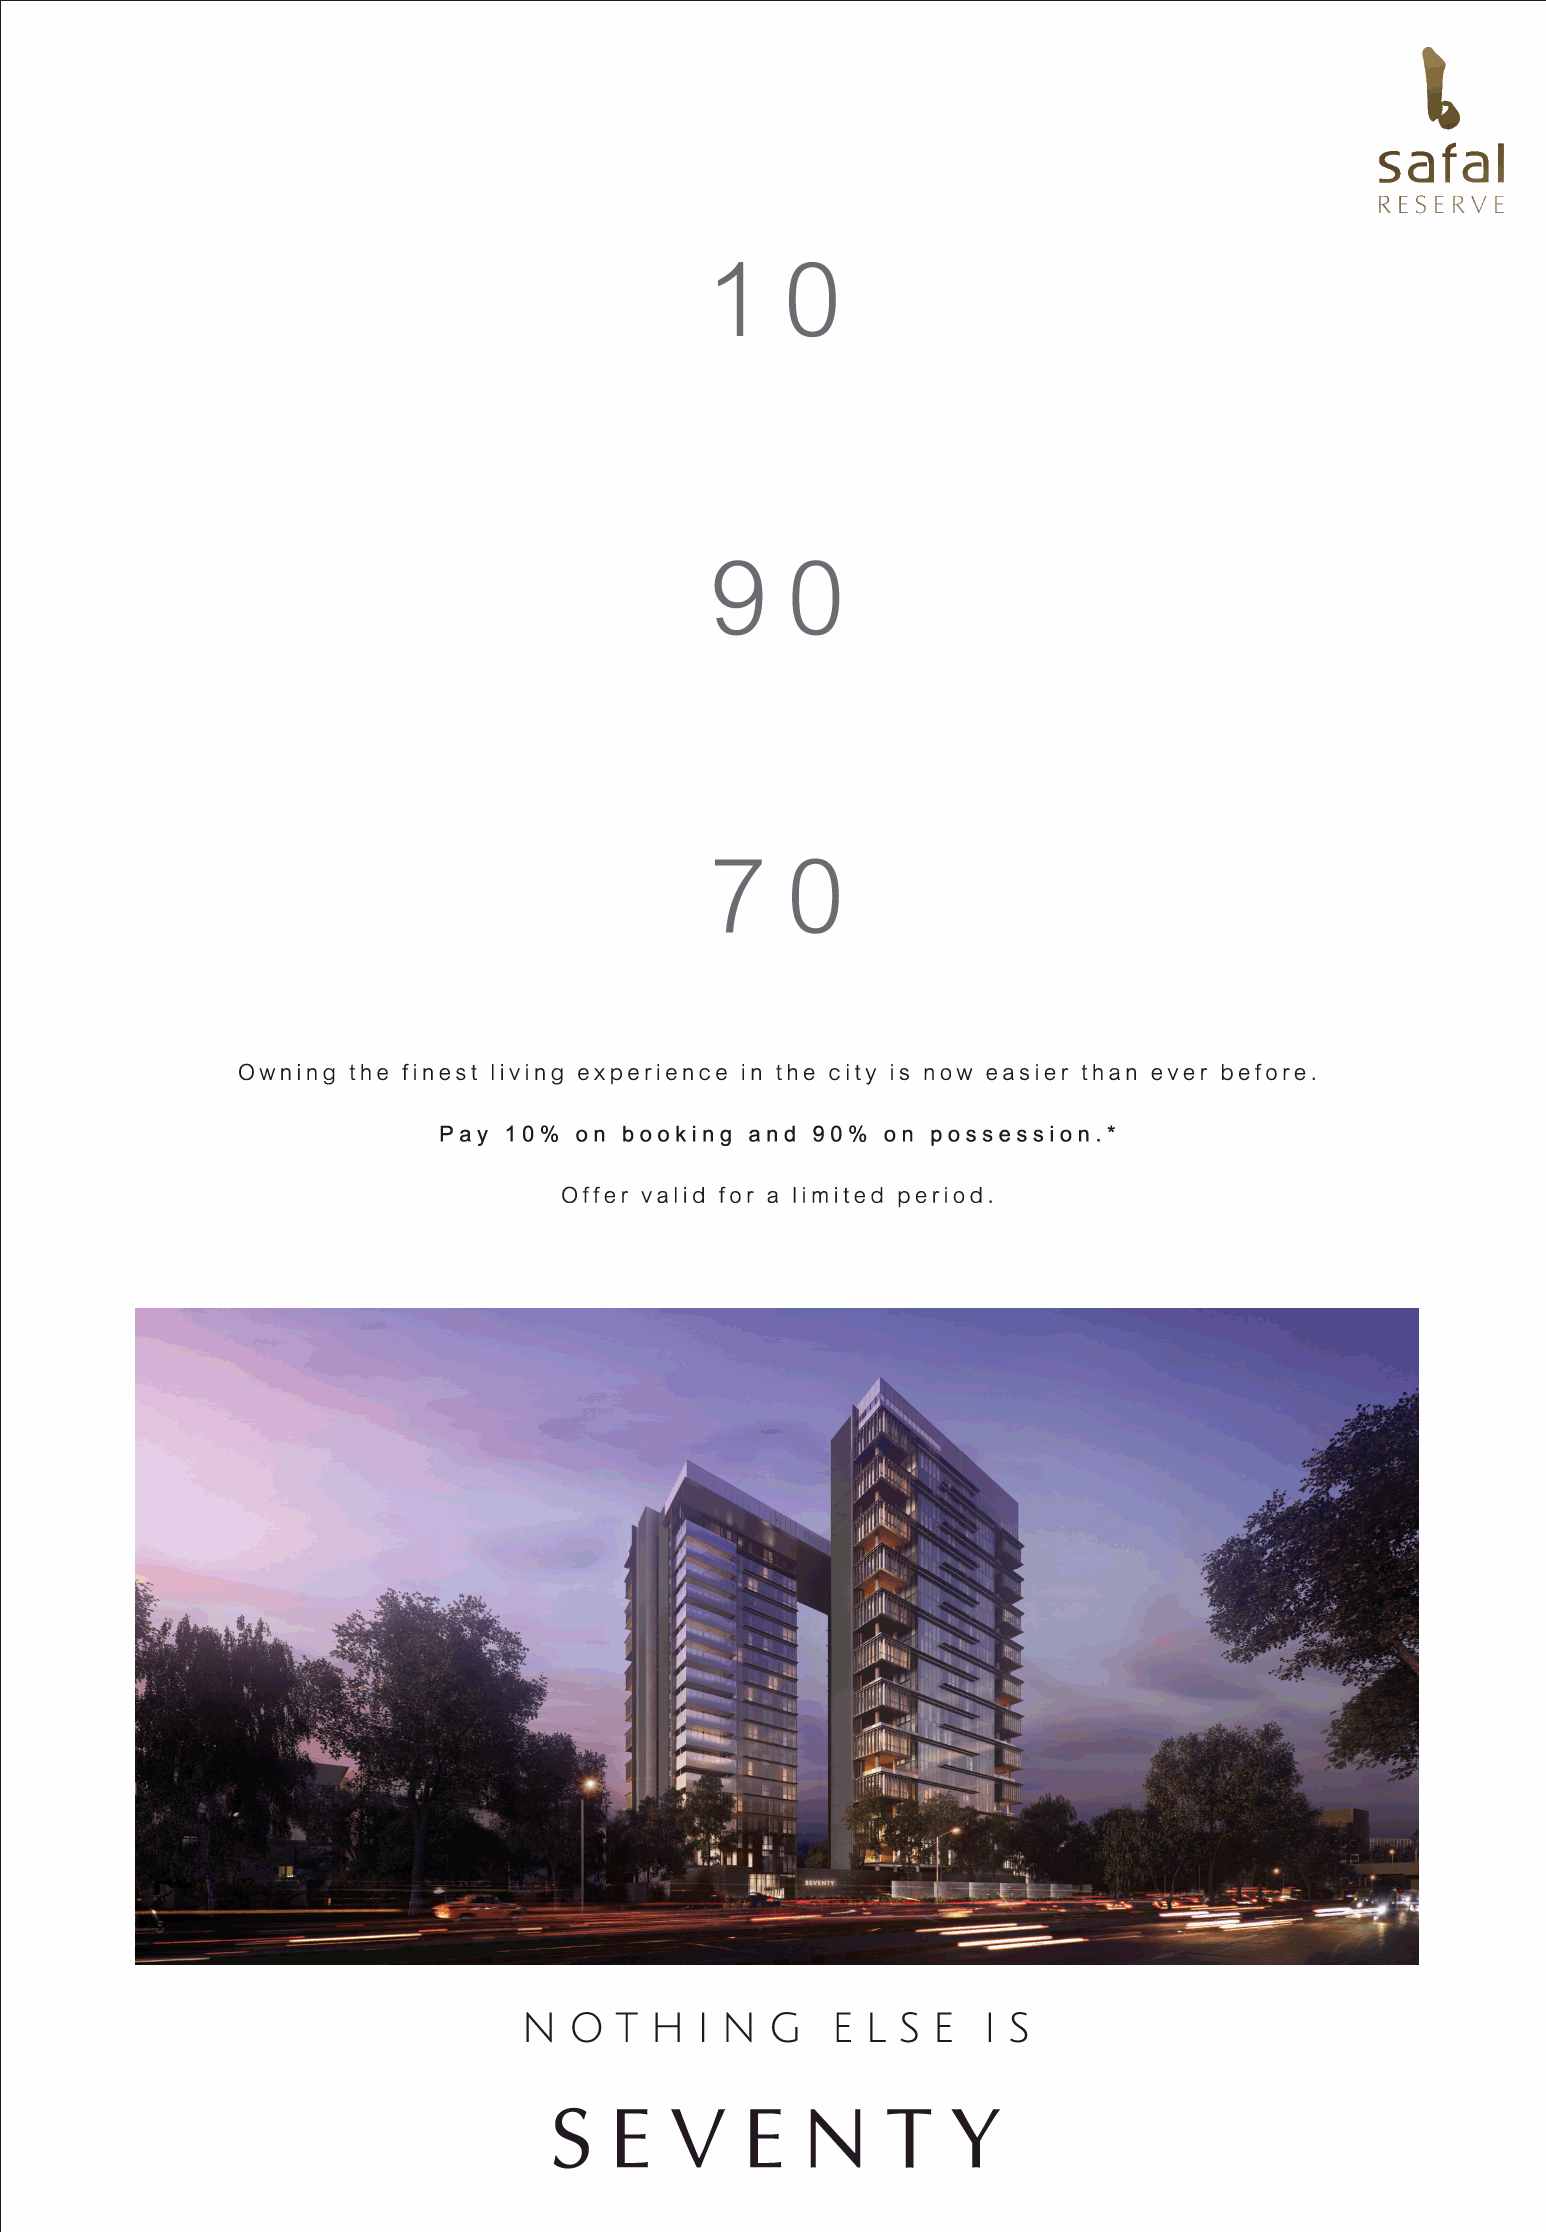 Own the finest living experience at B Safal Seventy in Ahmedabad Update